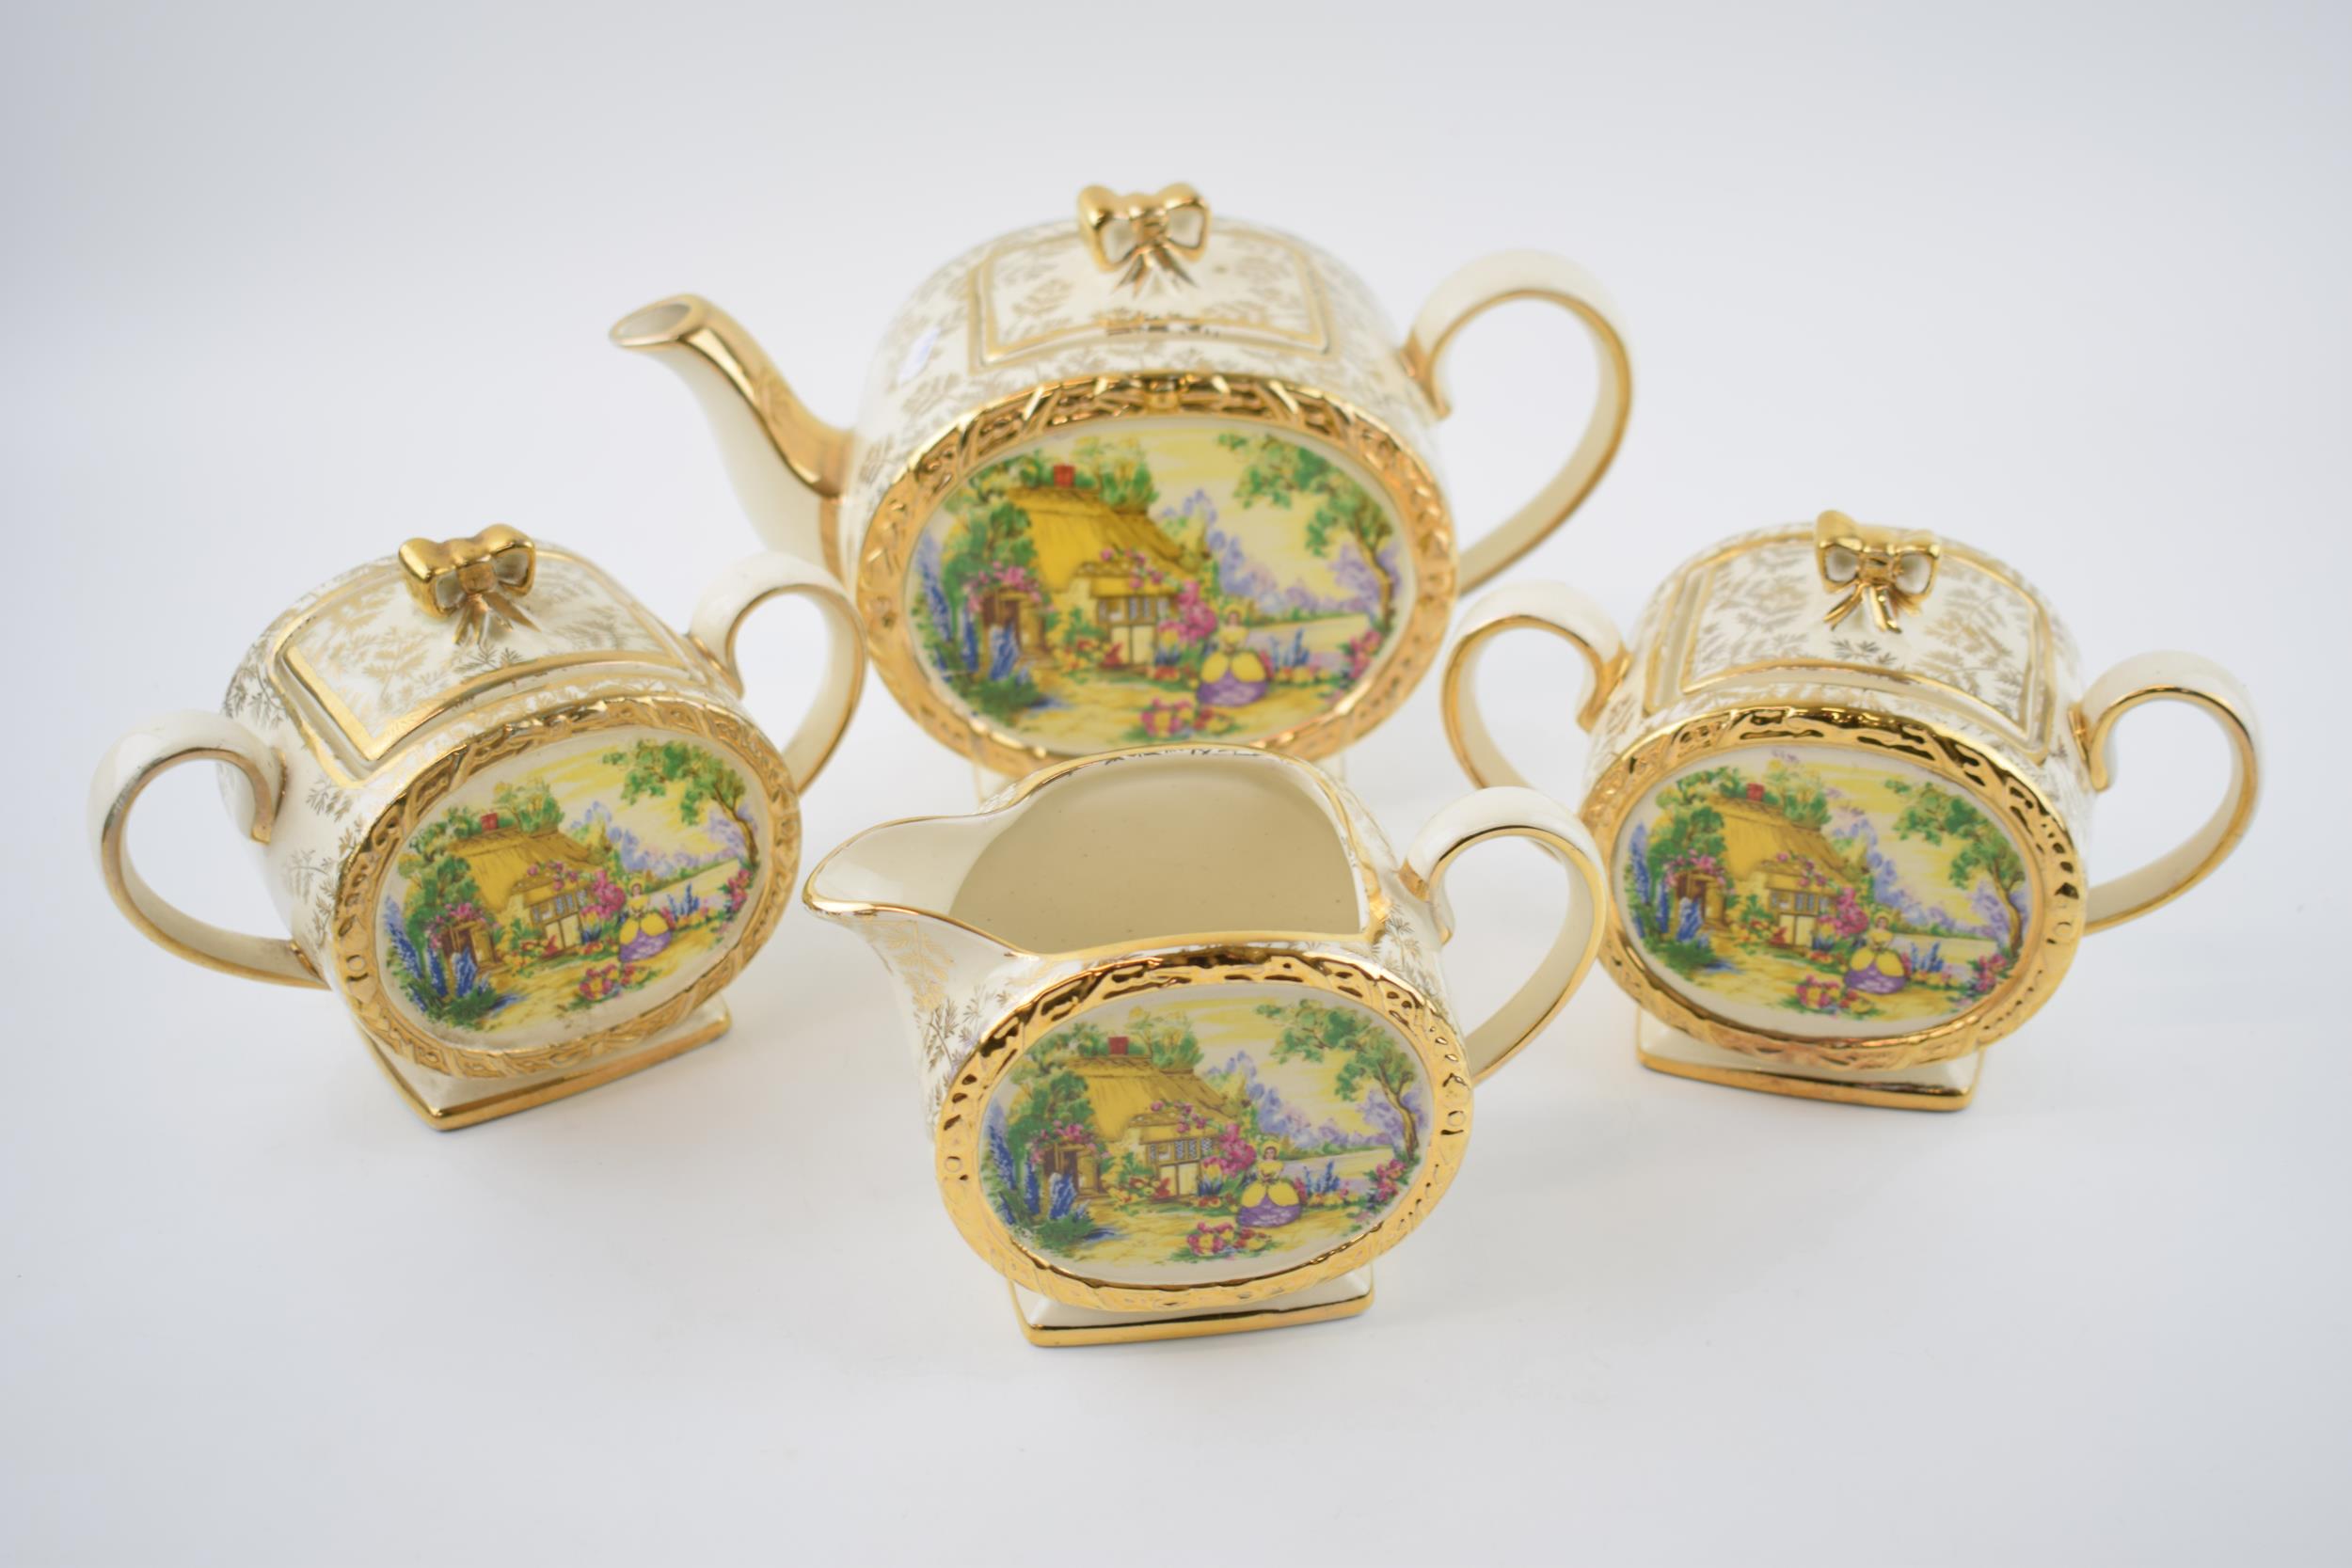 Sadler tea ware in a floral gilt pattern with a cottage scene to include a teapot, 2 lidded sugars